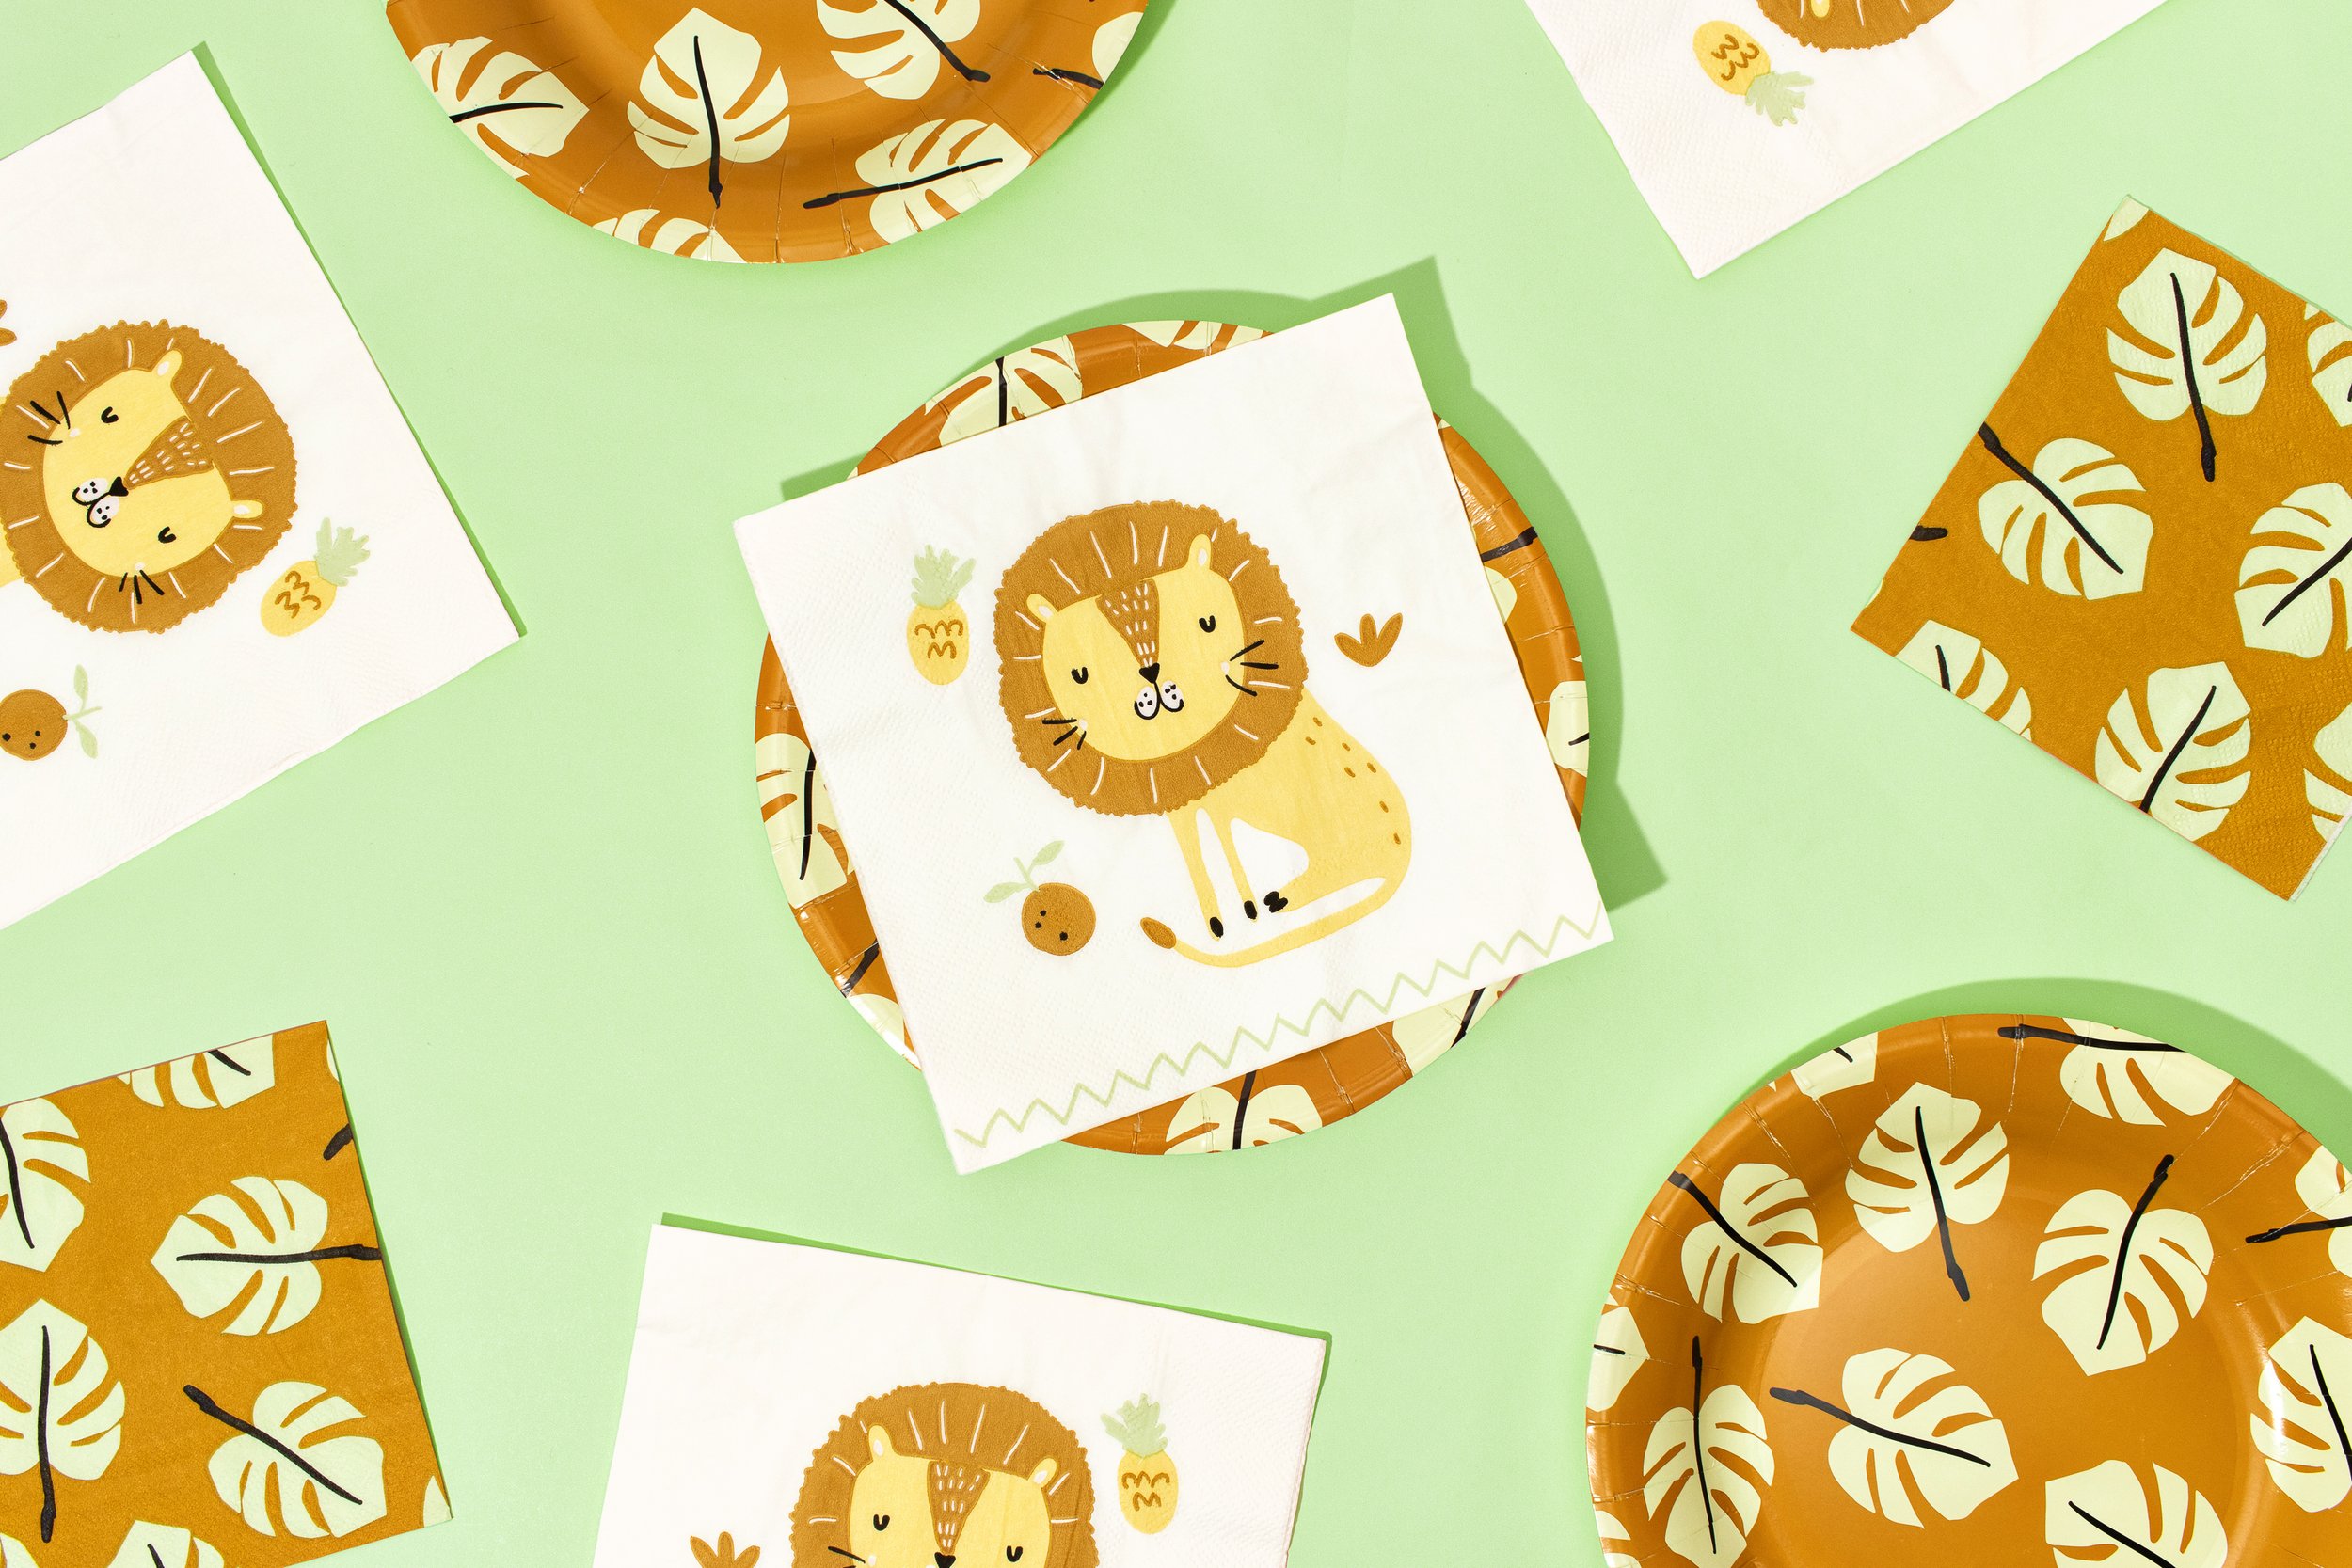 gif cycling through photos of Seasonal Celebrations paper product designs. Featuring tableware with different holidays represented on the designs.